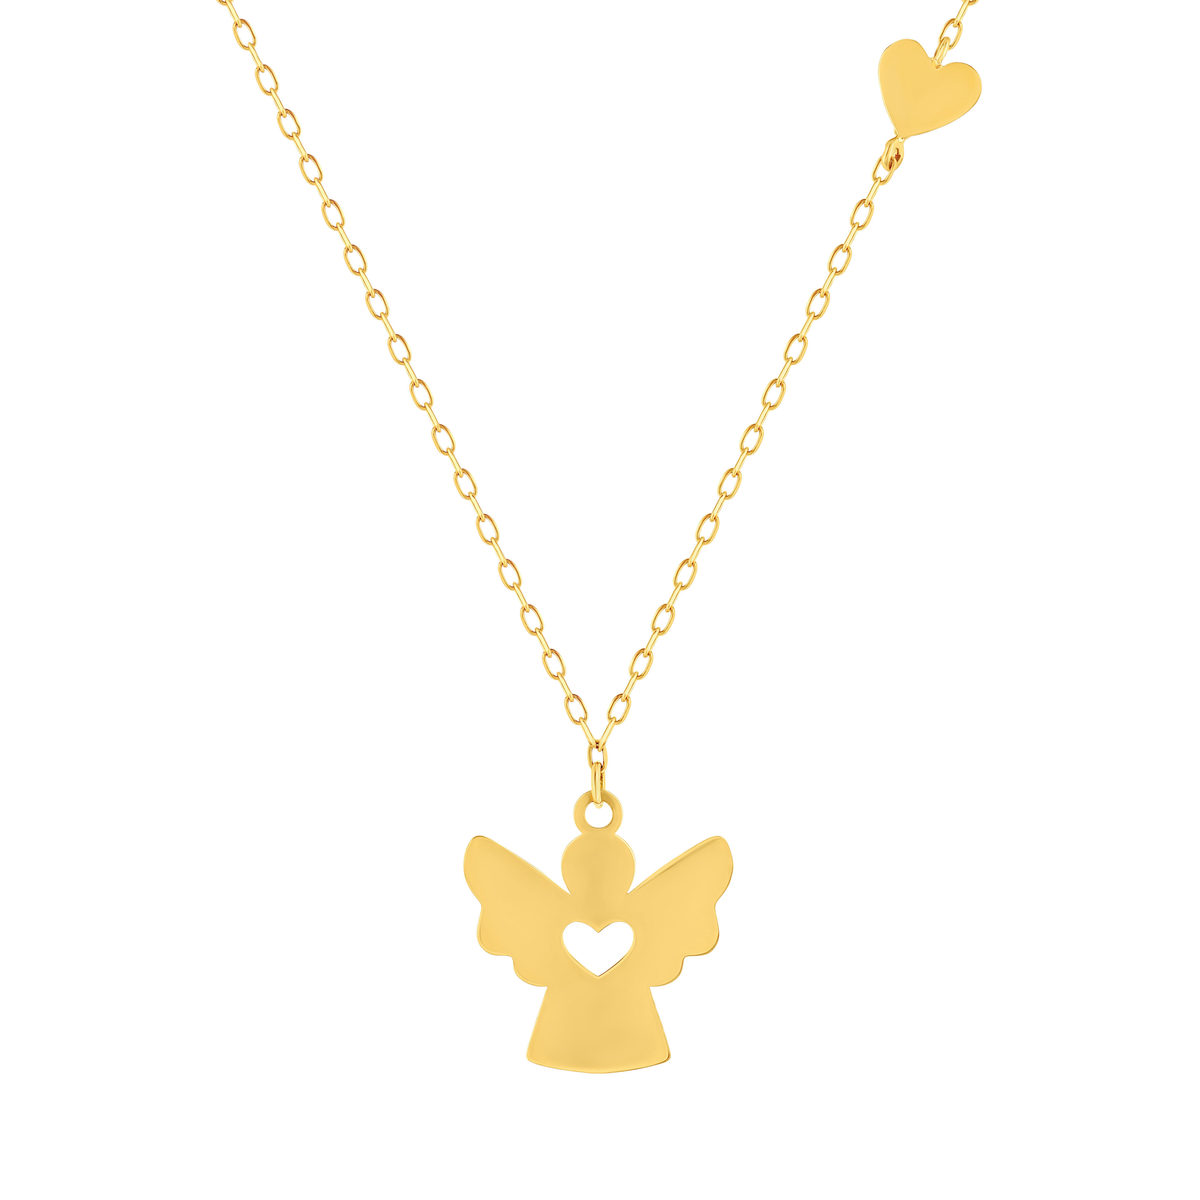 Collier or 375 jaune coeur et pampille ange 45cm